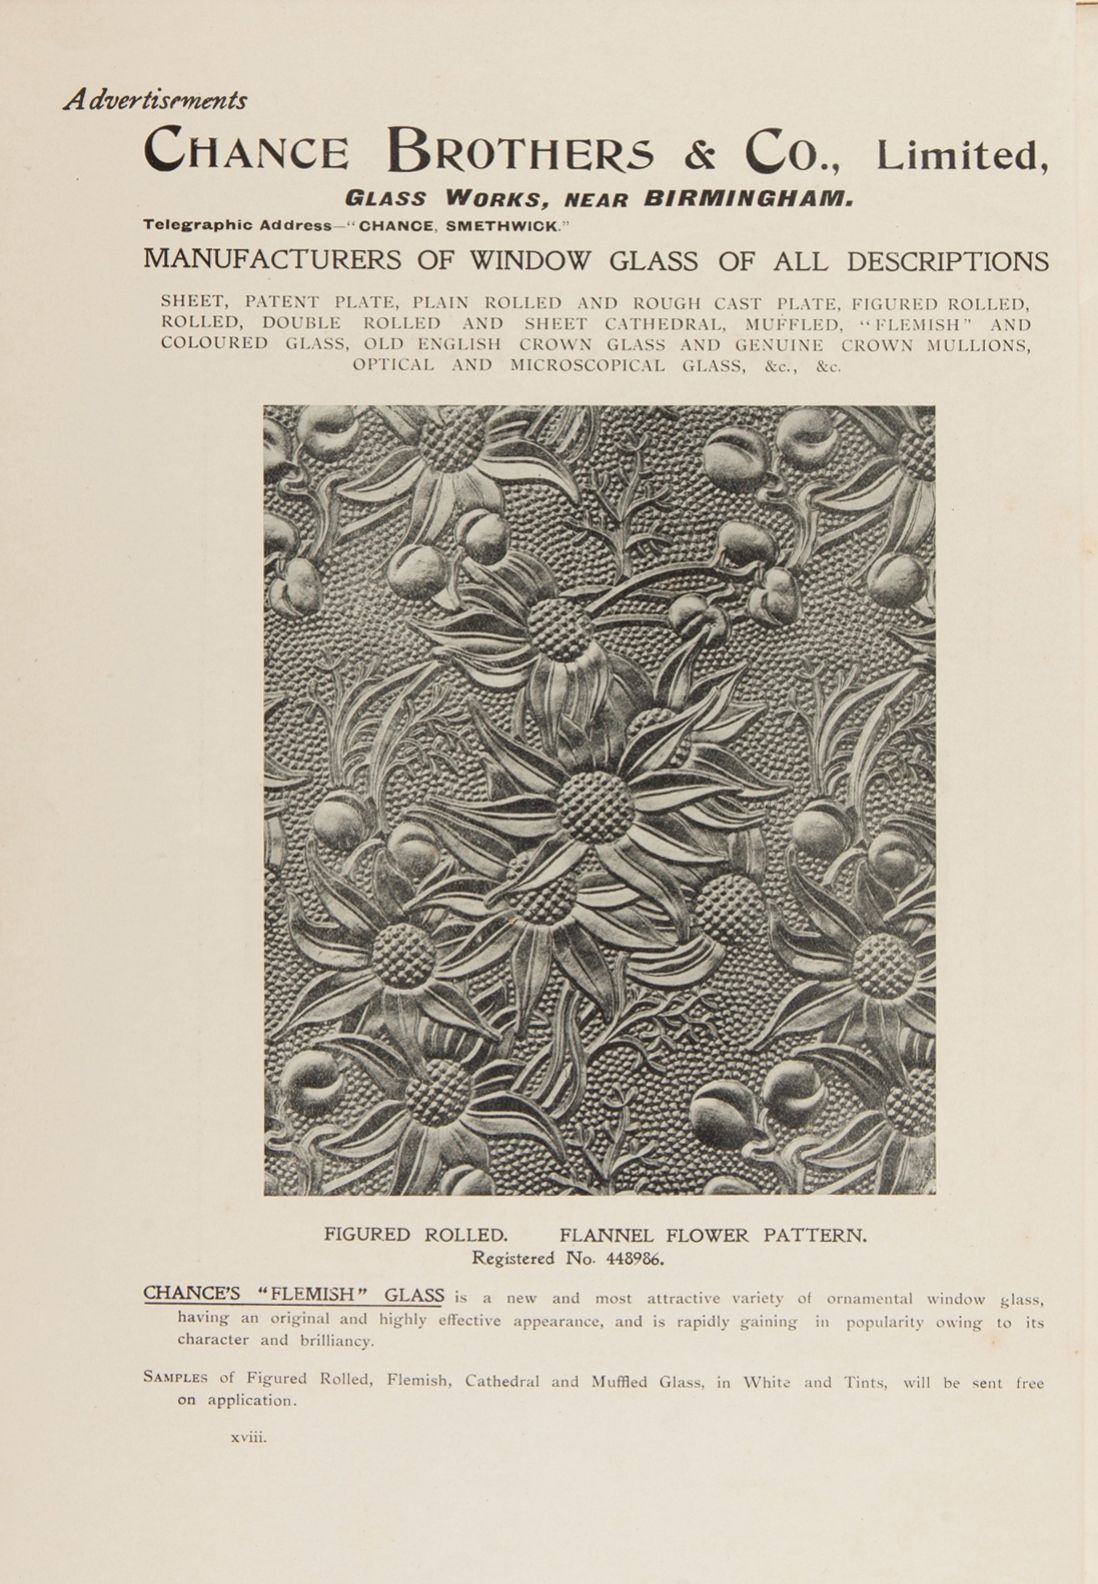 Chance Brothers advertisement  Advertisement for Chance Brothers & Co Limited of England featuring its figured rolled 'Flannel flower' pattern, as illustrated in: Art and architecture, William Brooks, Sydney, Vol III, No 3, May 1906.  The British design registration number (448986) indicates that the Flannel Flower pattern was first registered in 1905.  Caroline Simpson Library & Research Collection, Museums of History NSW. periodicals 720 ART.